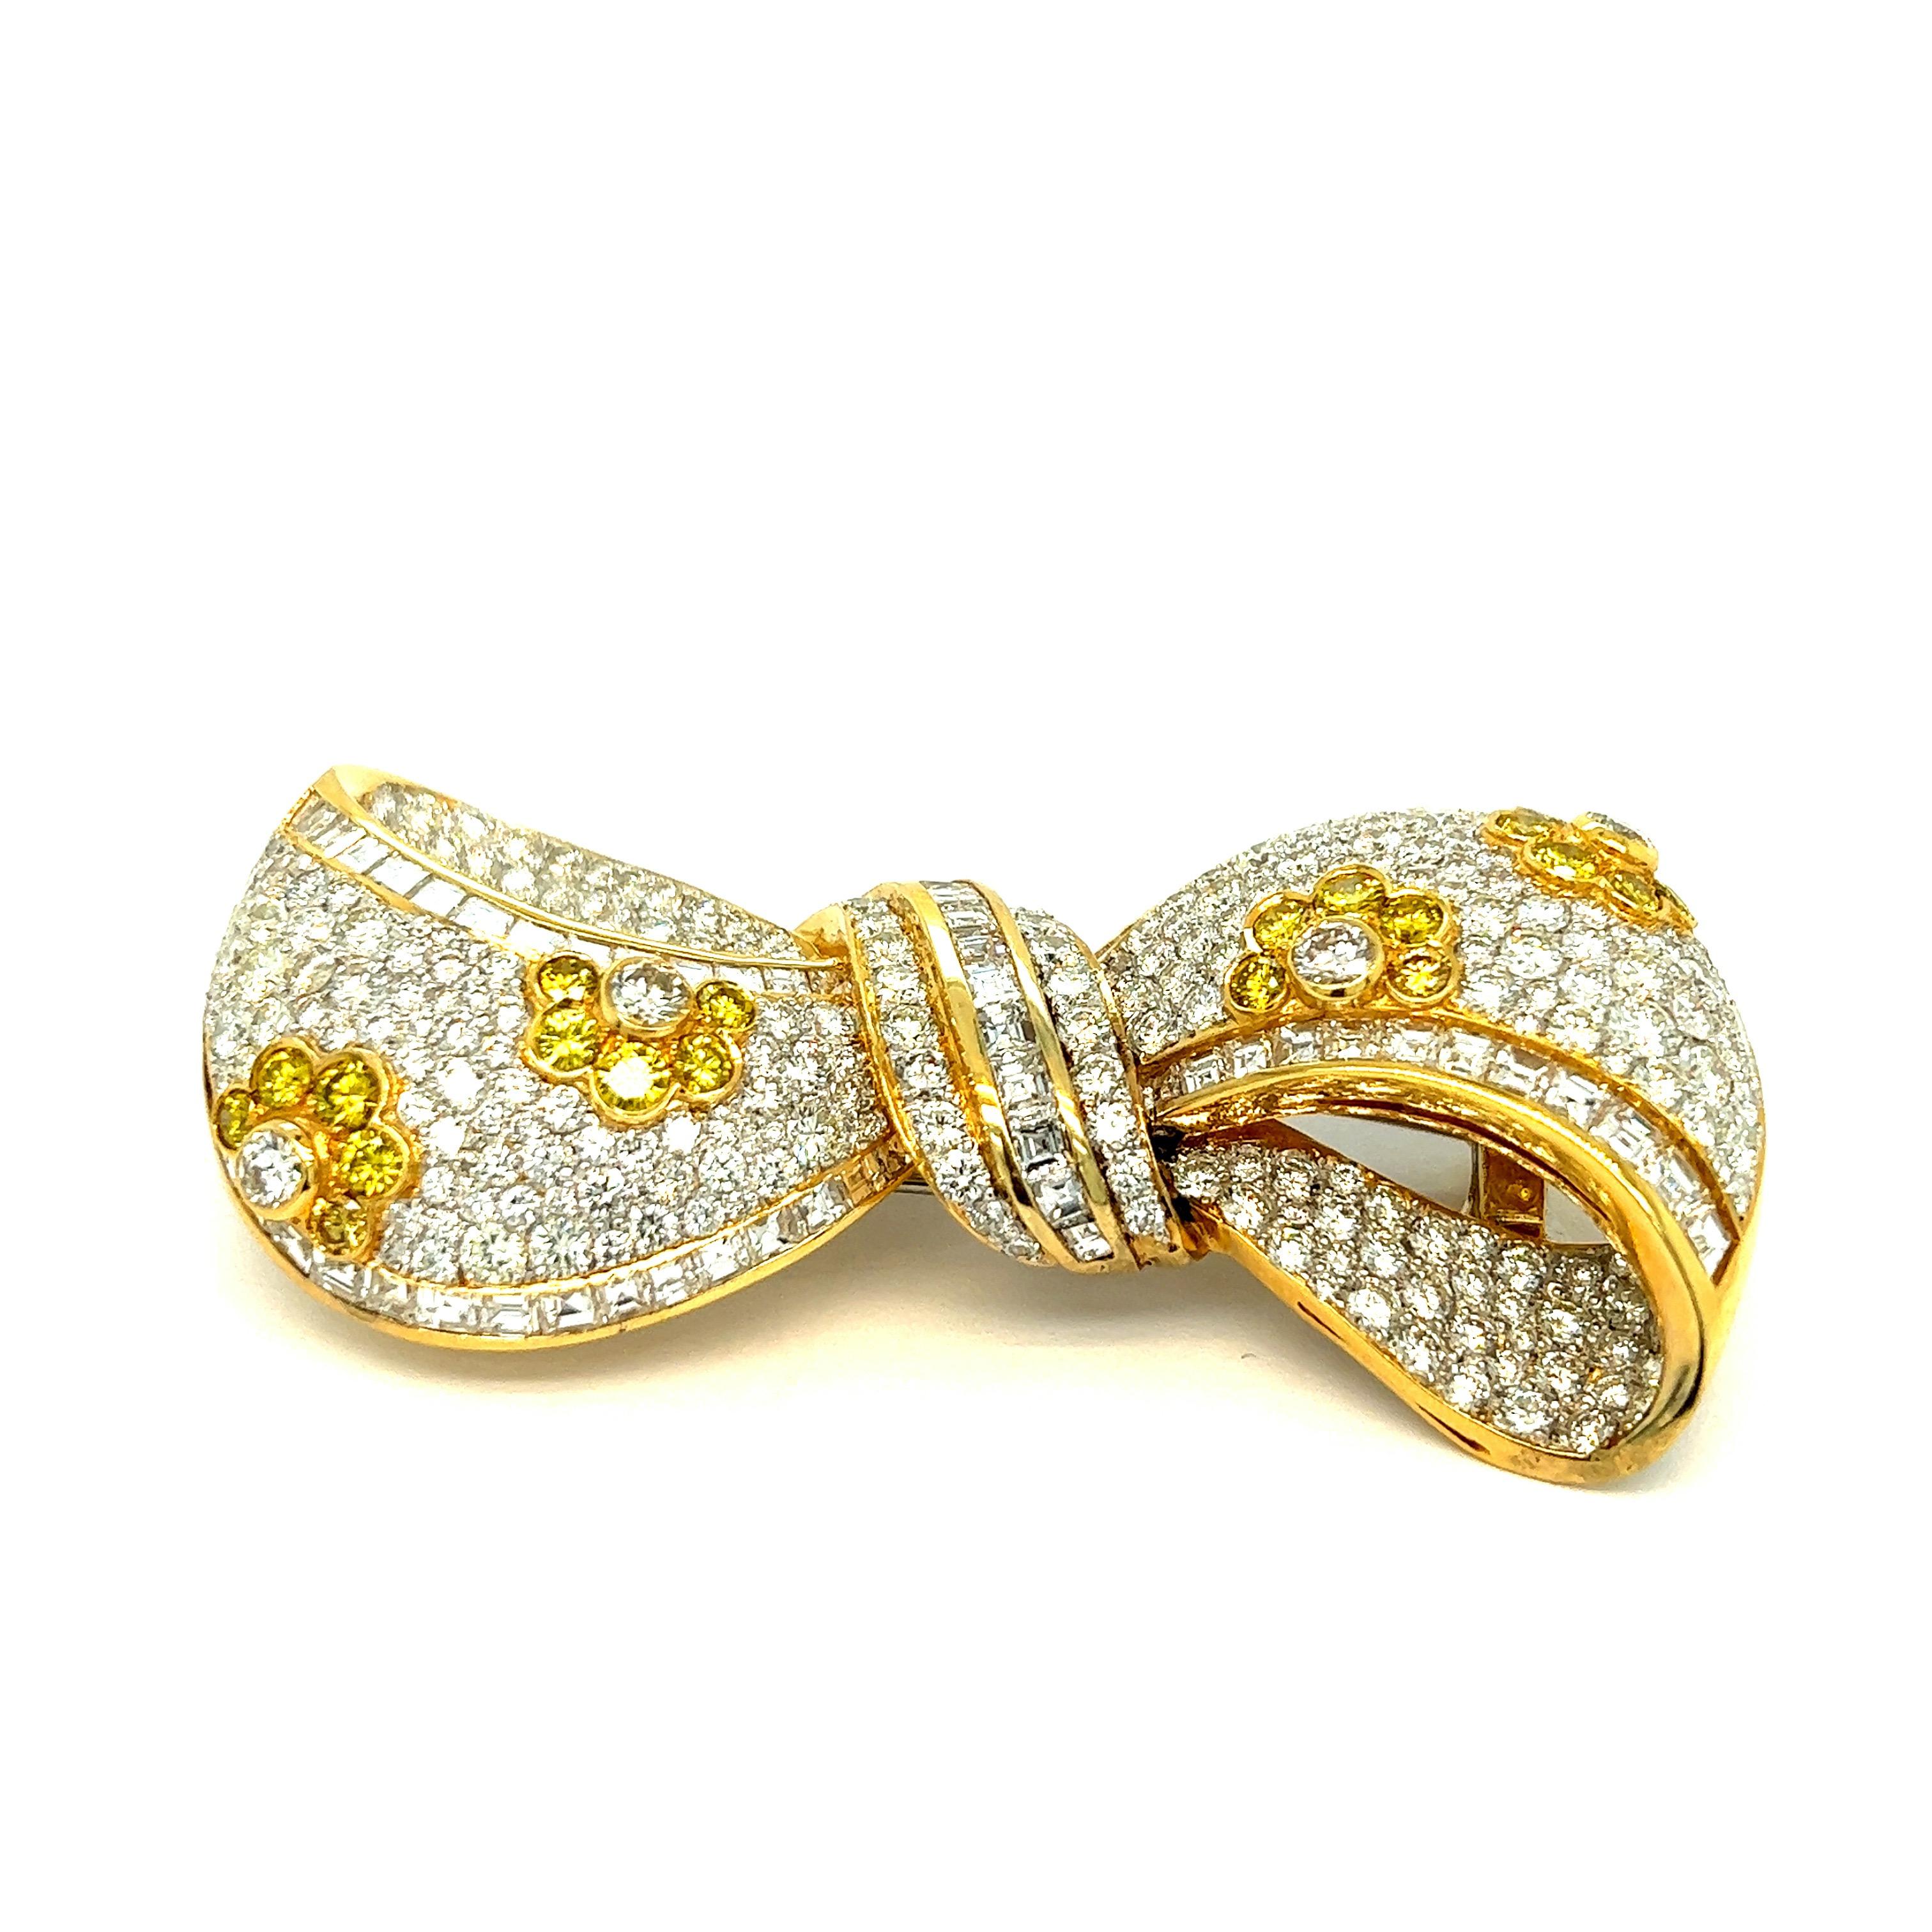 White & Fancy Color Diamonds Bow Brooch

Beautiful round- and square-cut white and fancy color diamonds of 12.74 carats set on 18 karat white and yellow gold; marked 750, 18k, D1274

Size: width 2.5 inches, length 1.13 inches
Total weight: 30.0 grams